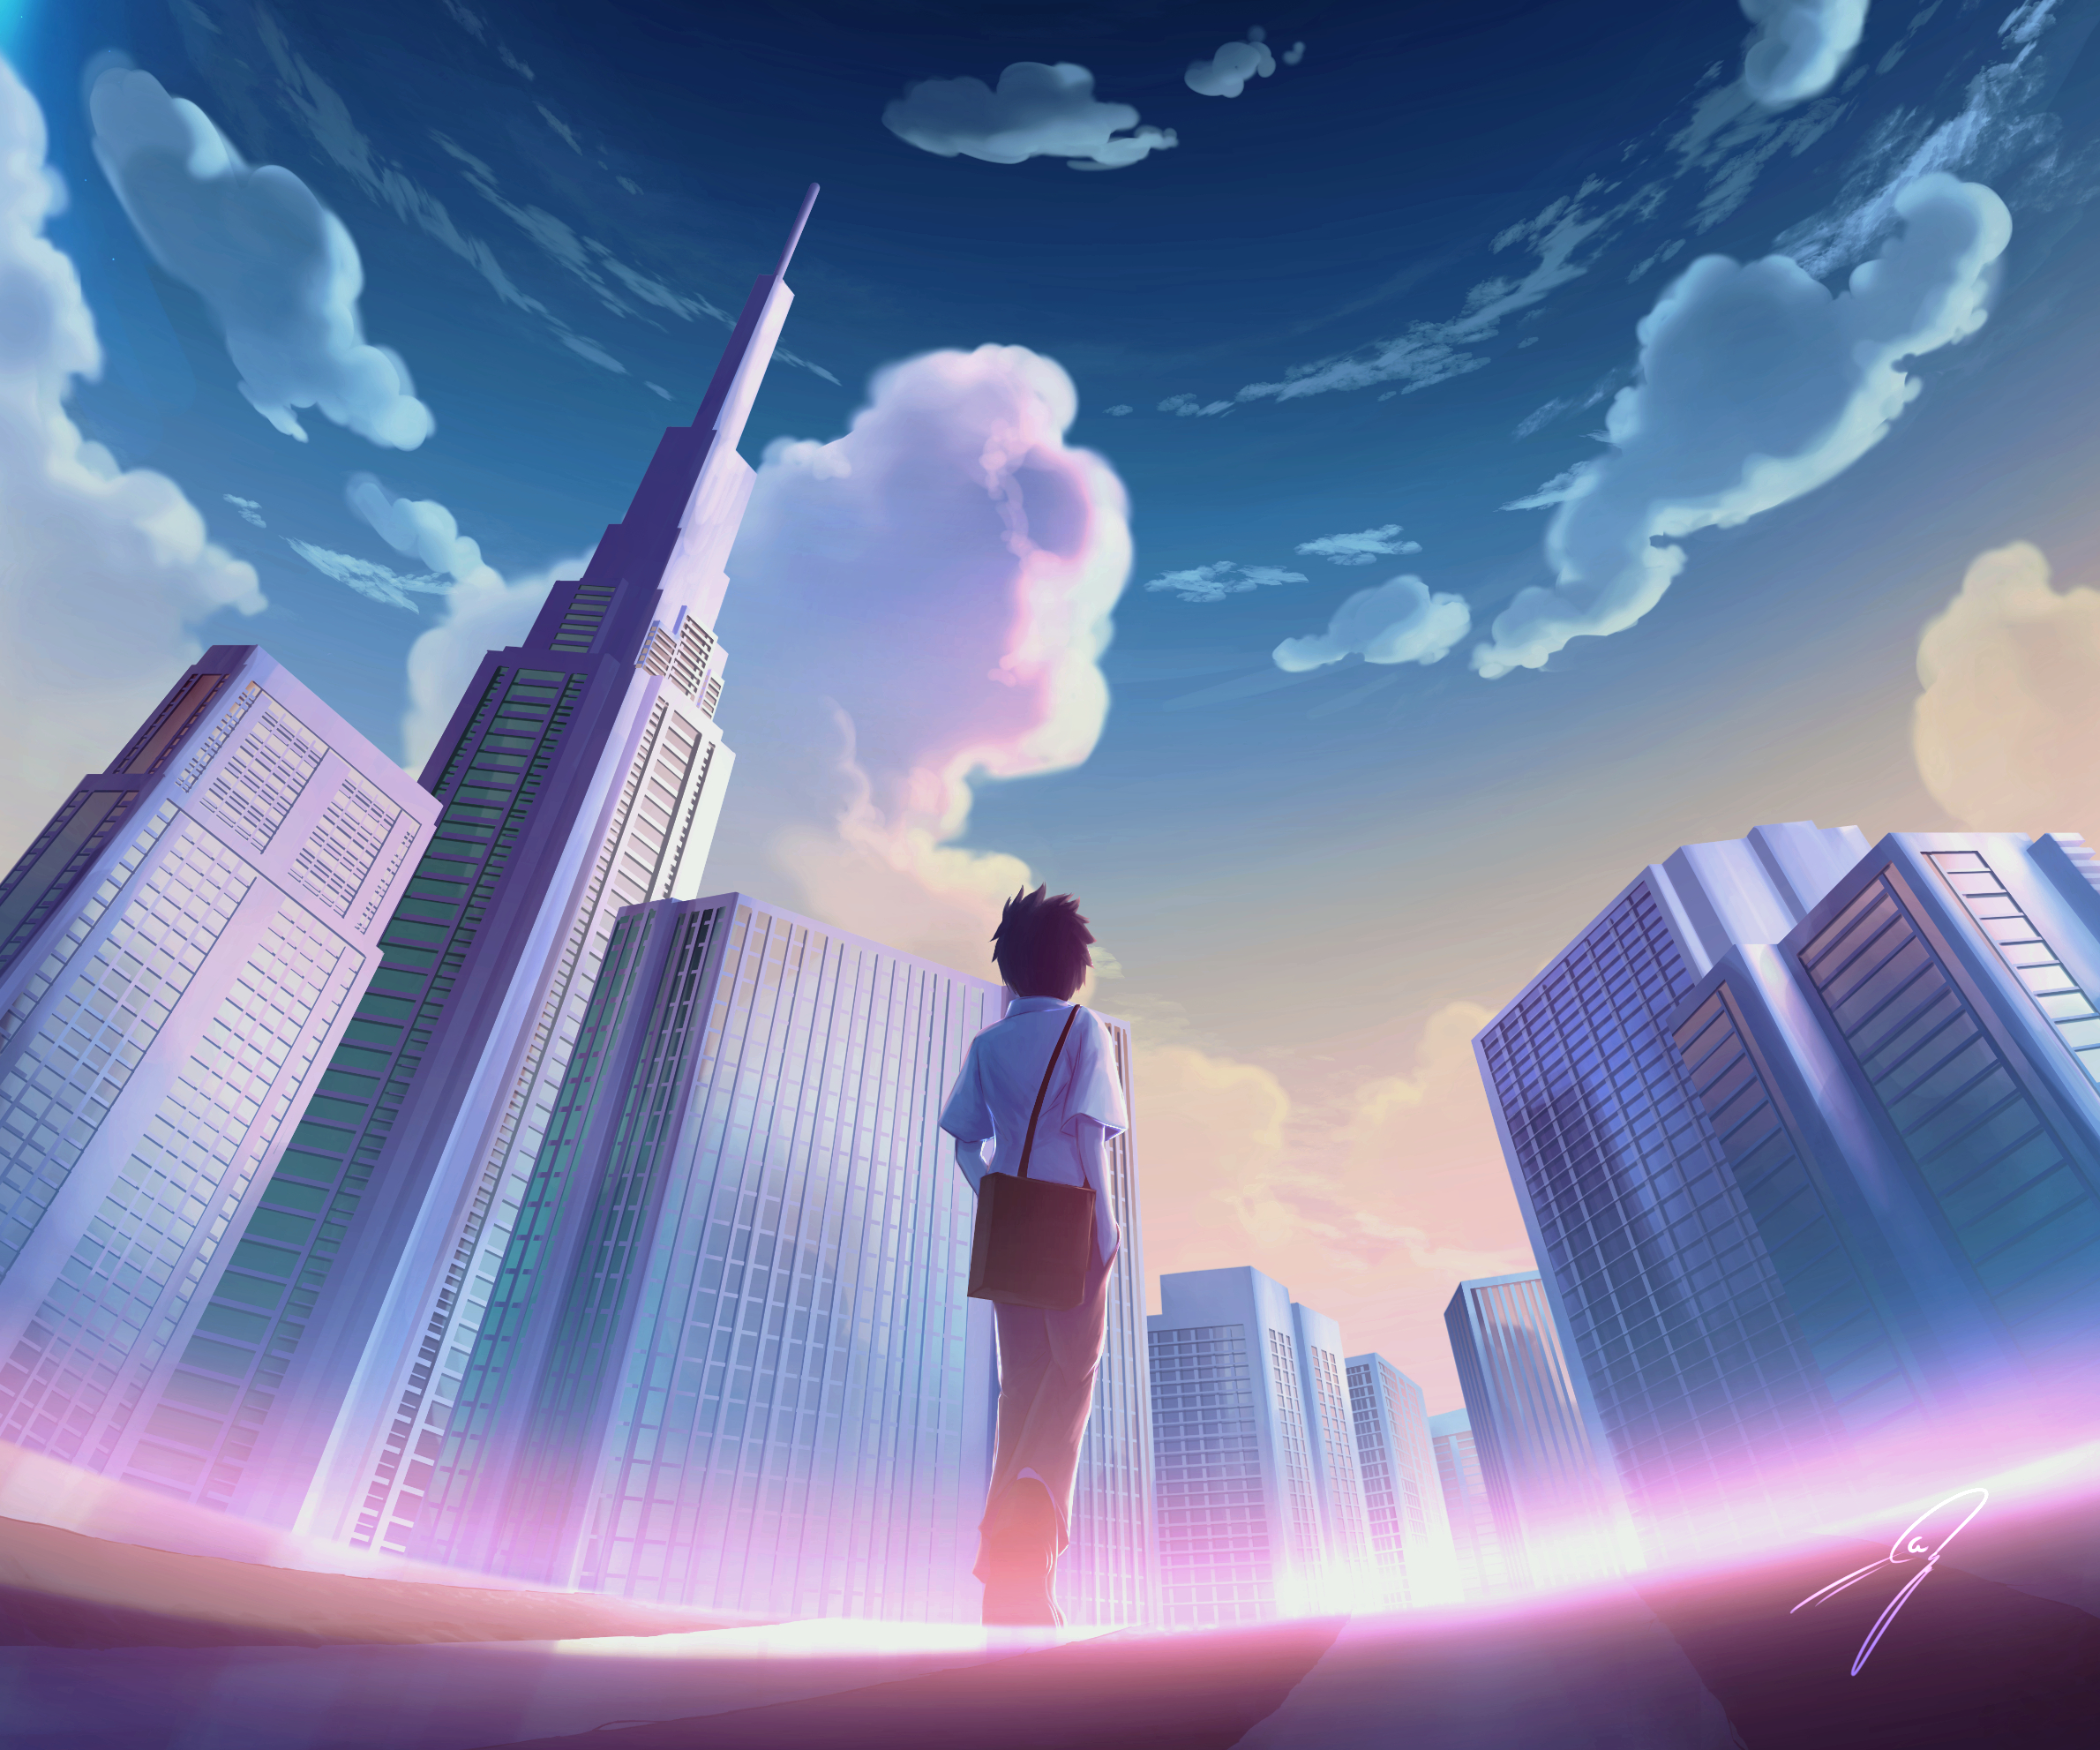 Your Name HD Wallpapers | 4K Backgrounds - Wallpapers Den